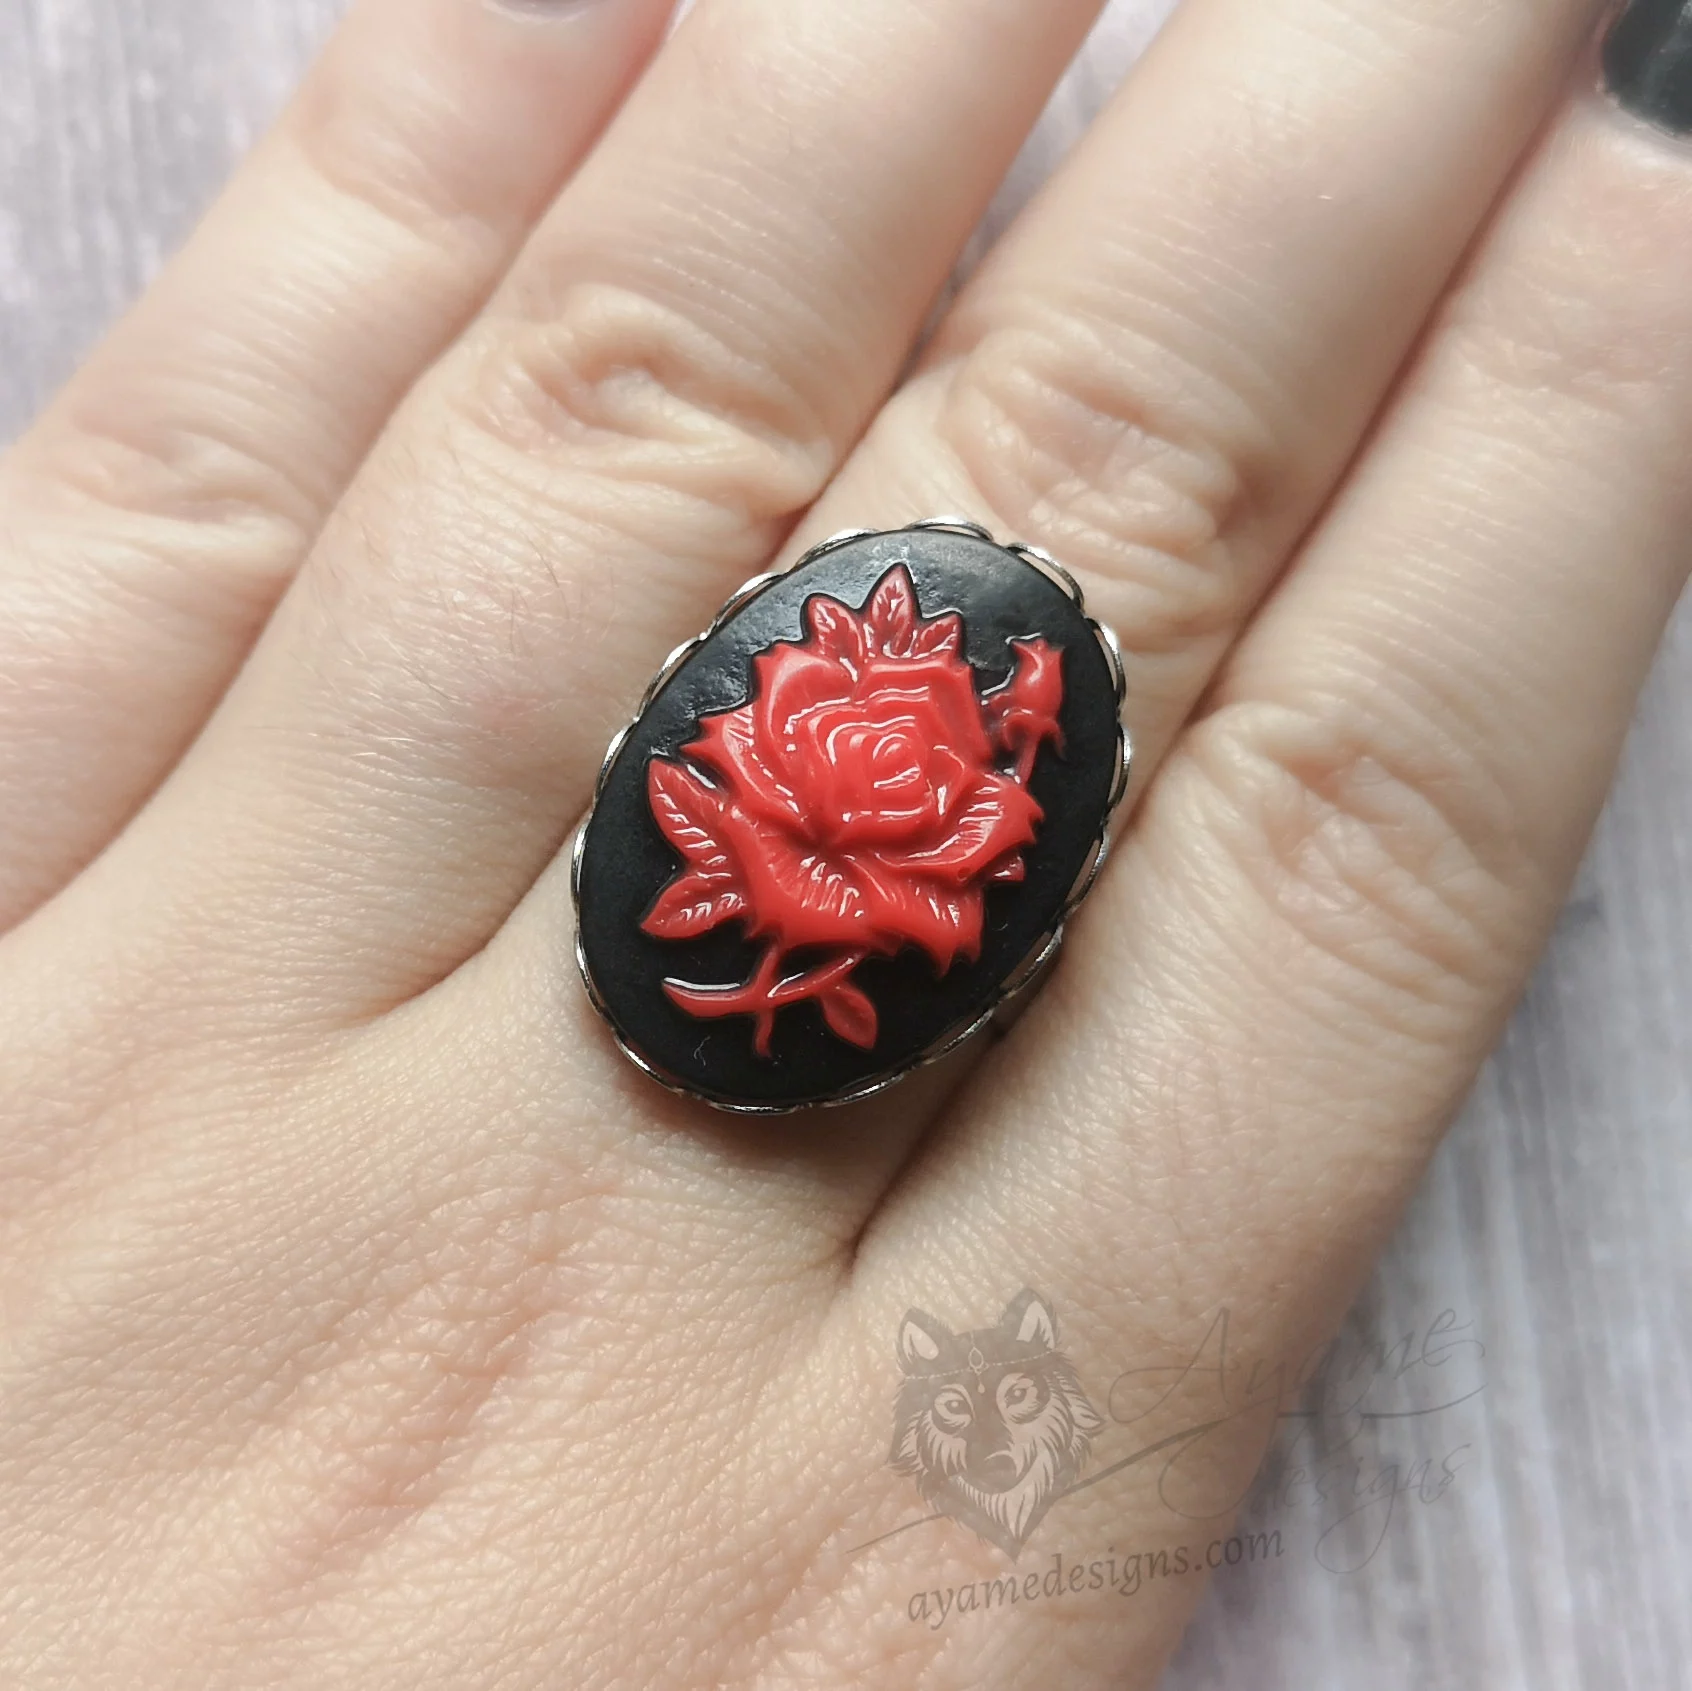 Adjustable stainless steel ring with a Victorian rose cameo